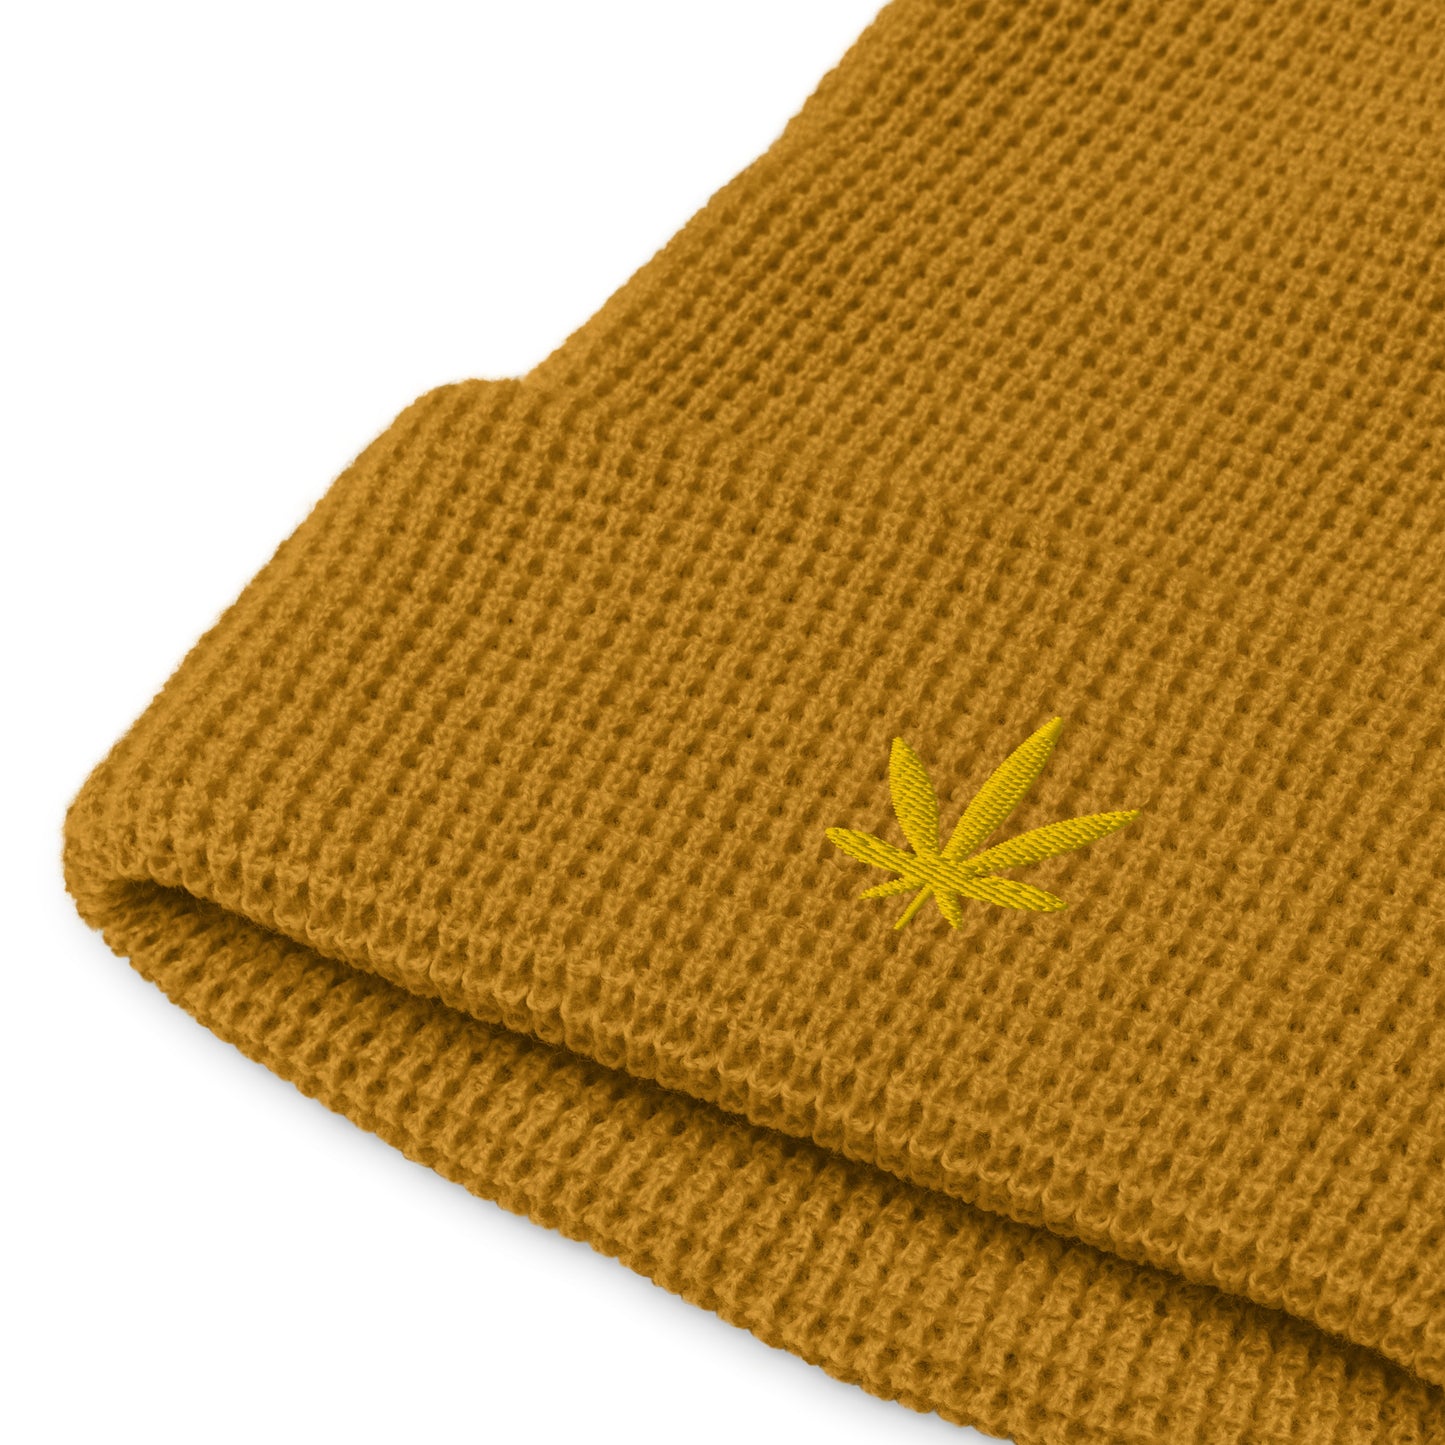 Waffle beanie embroidered